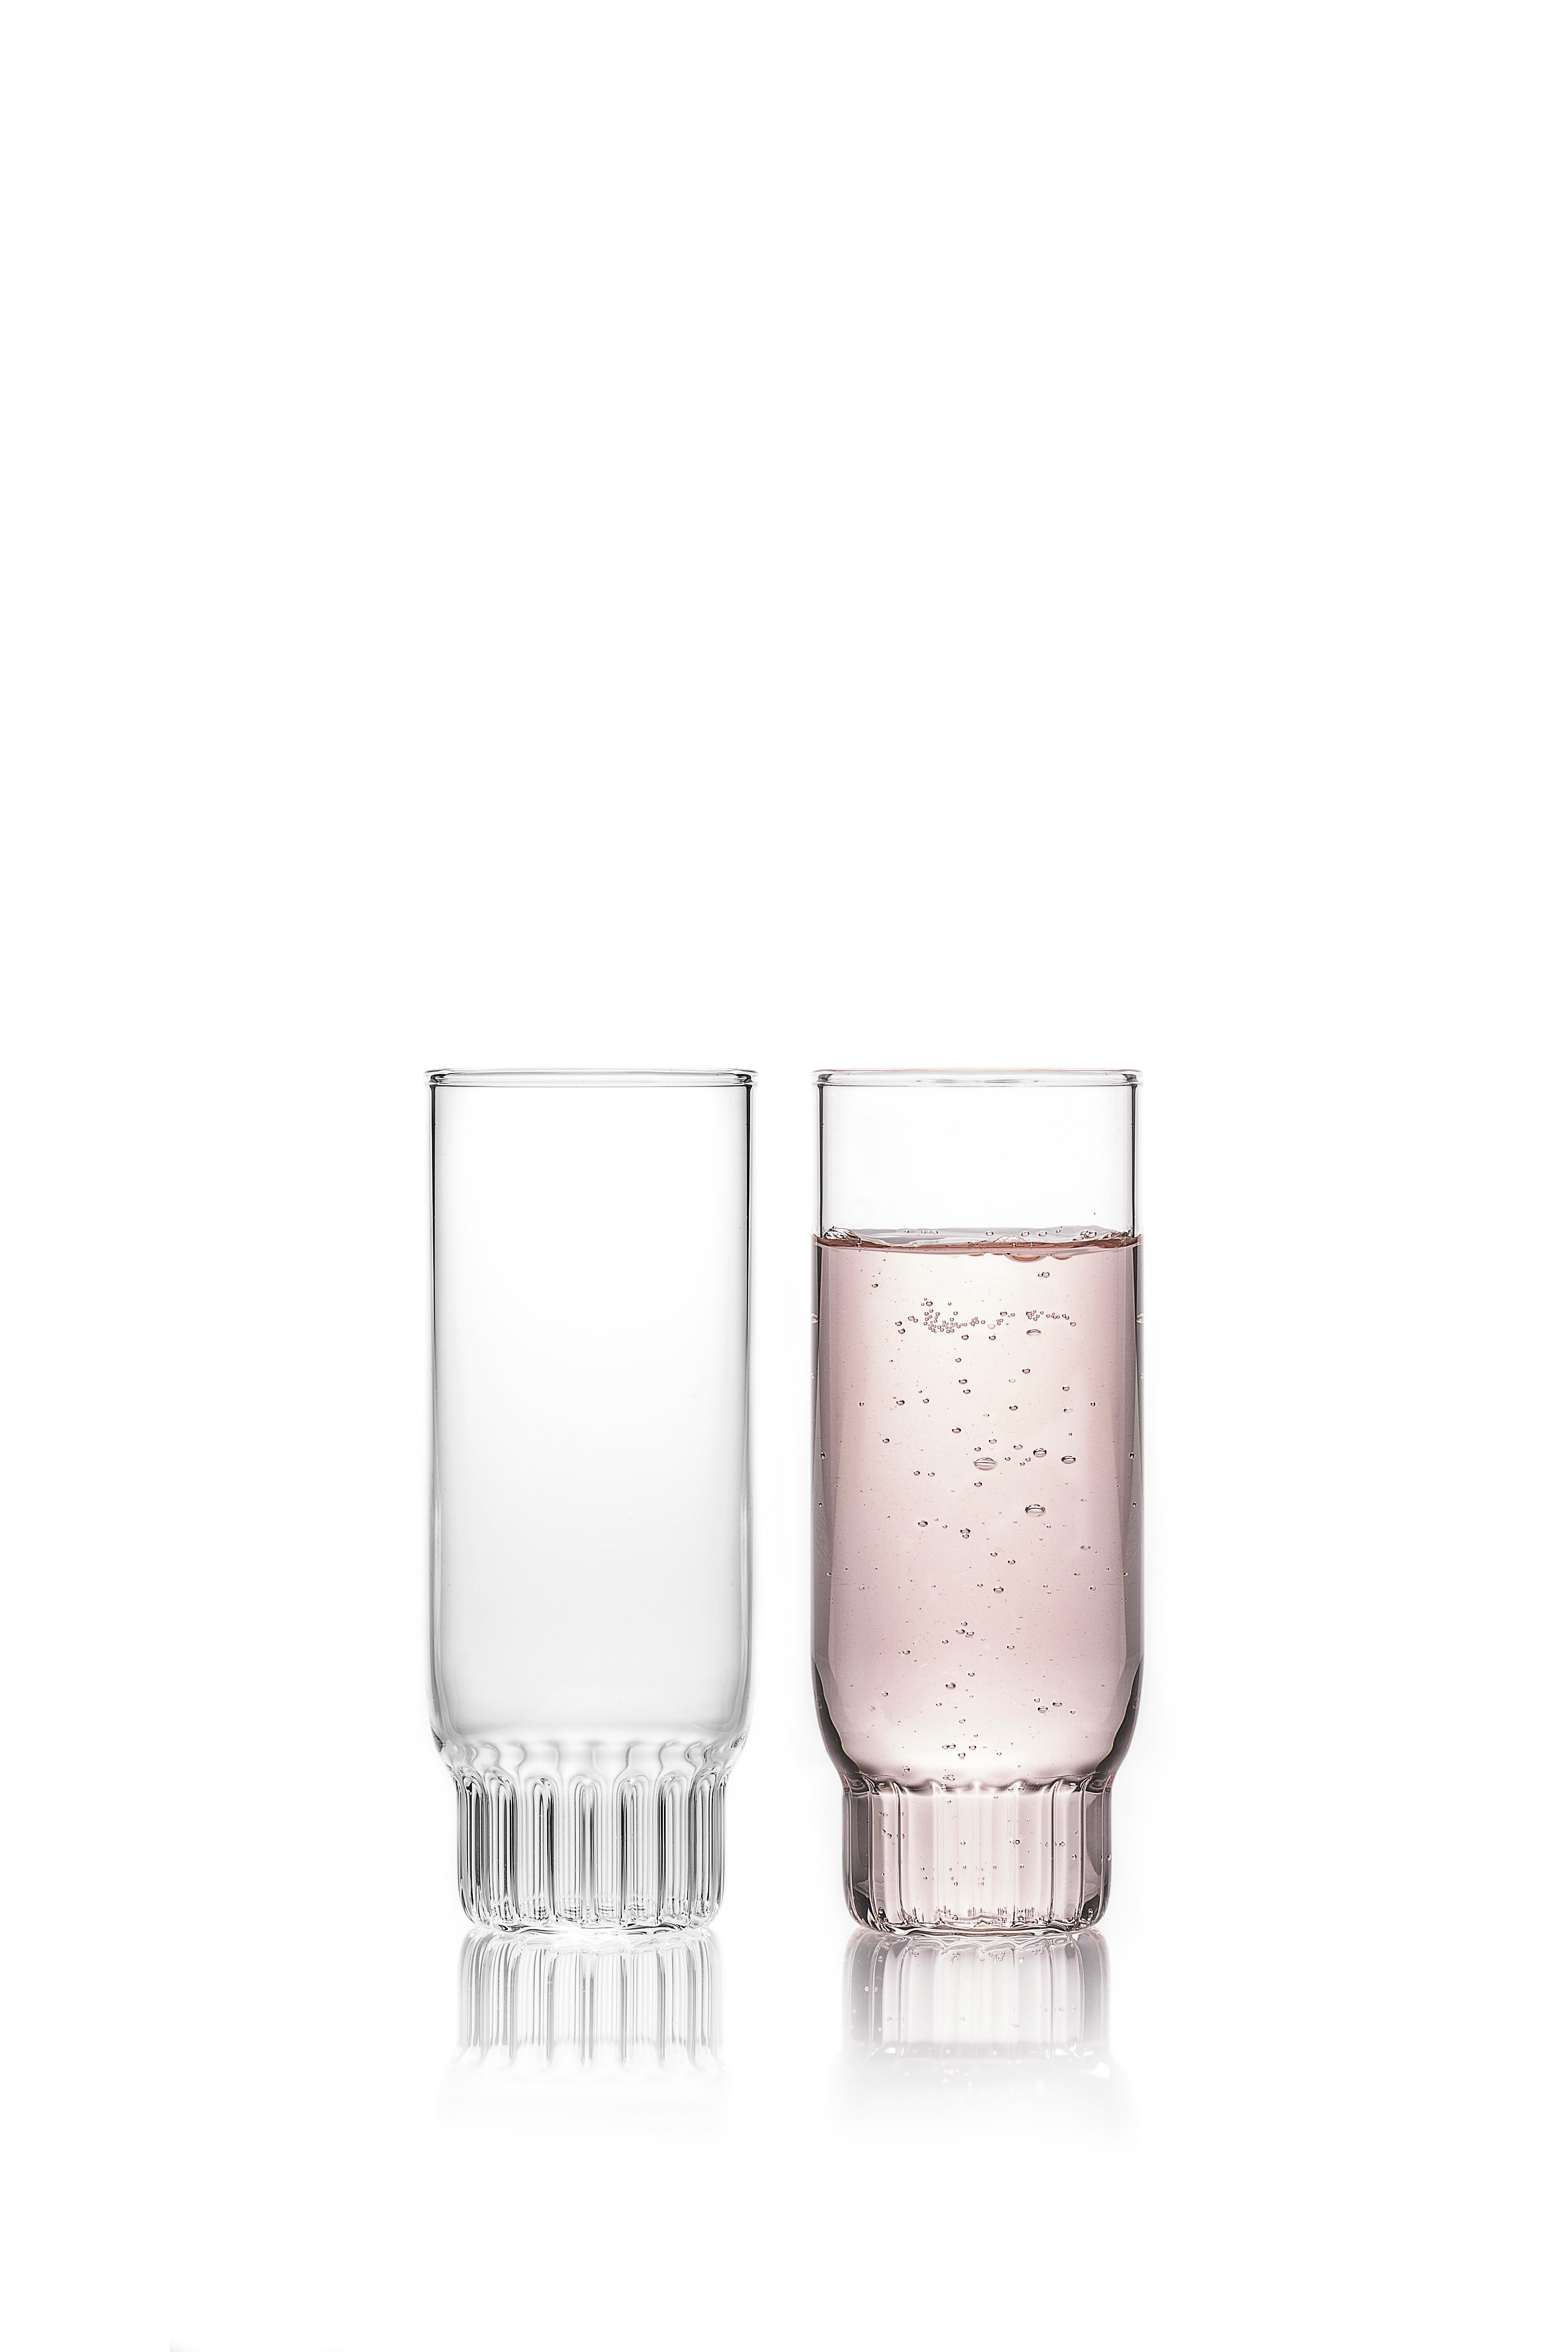 Rasori champagne flute glasses, set of two

As the designer's favorite street in Milan, her home away from home, the clear Czech contemporary Rasori Champagne Flute glasses are a playful and delicate combination of materials and form, just like